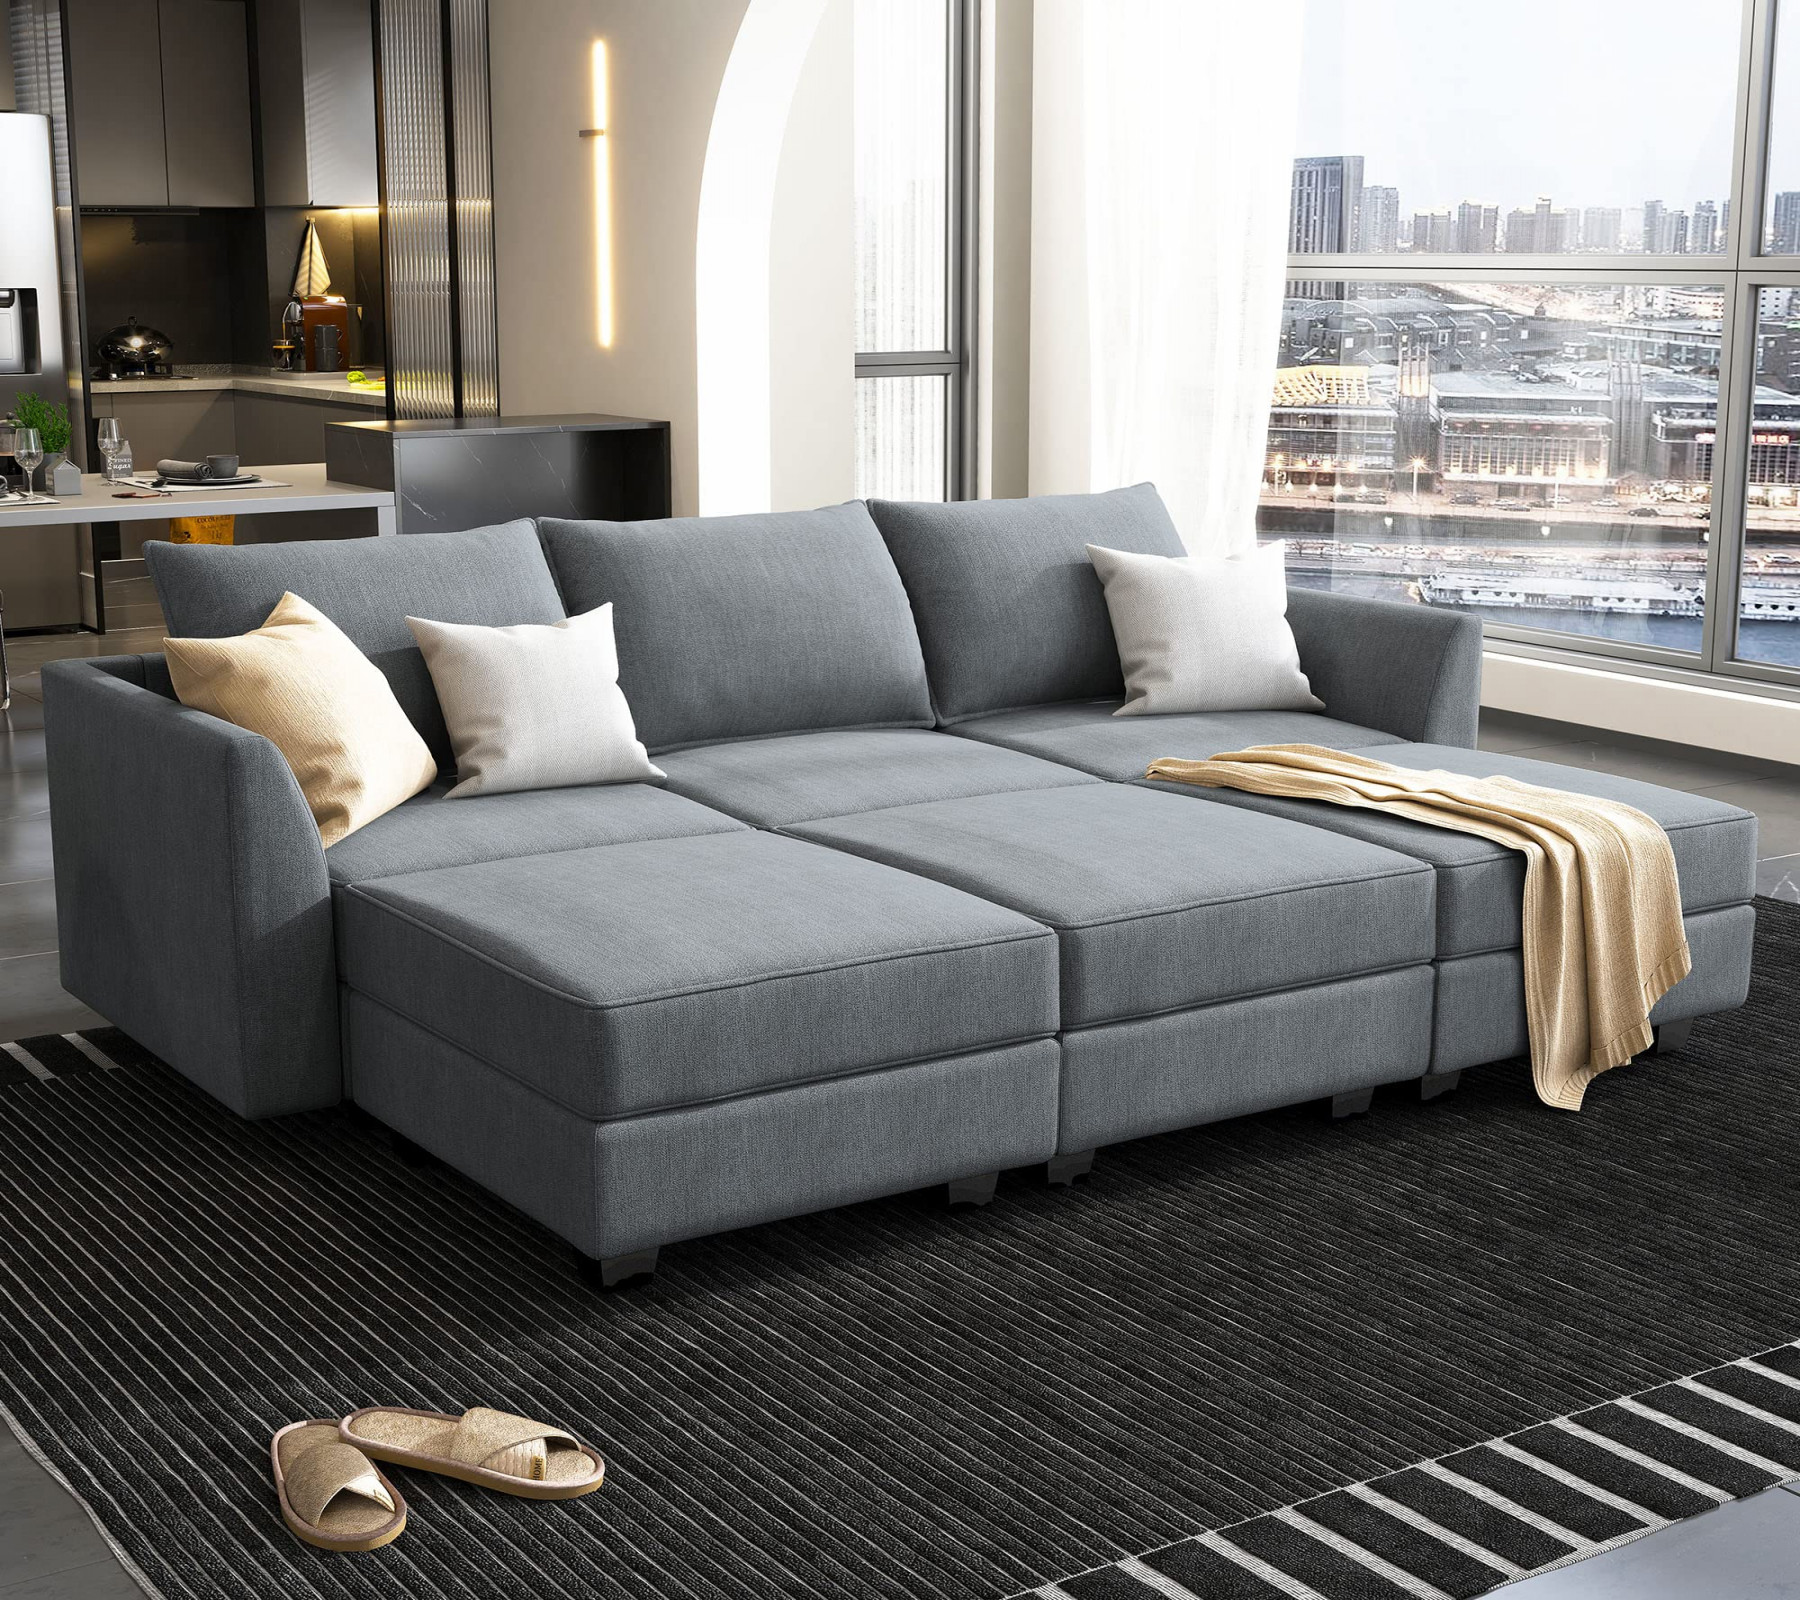 HONBAY Modern Modular Sectional Sofa Sleeper Couch Living Room U Shape Sofa  Couch with Ottoman Set, Full Size Sectional Sofa Bed for Small Space,